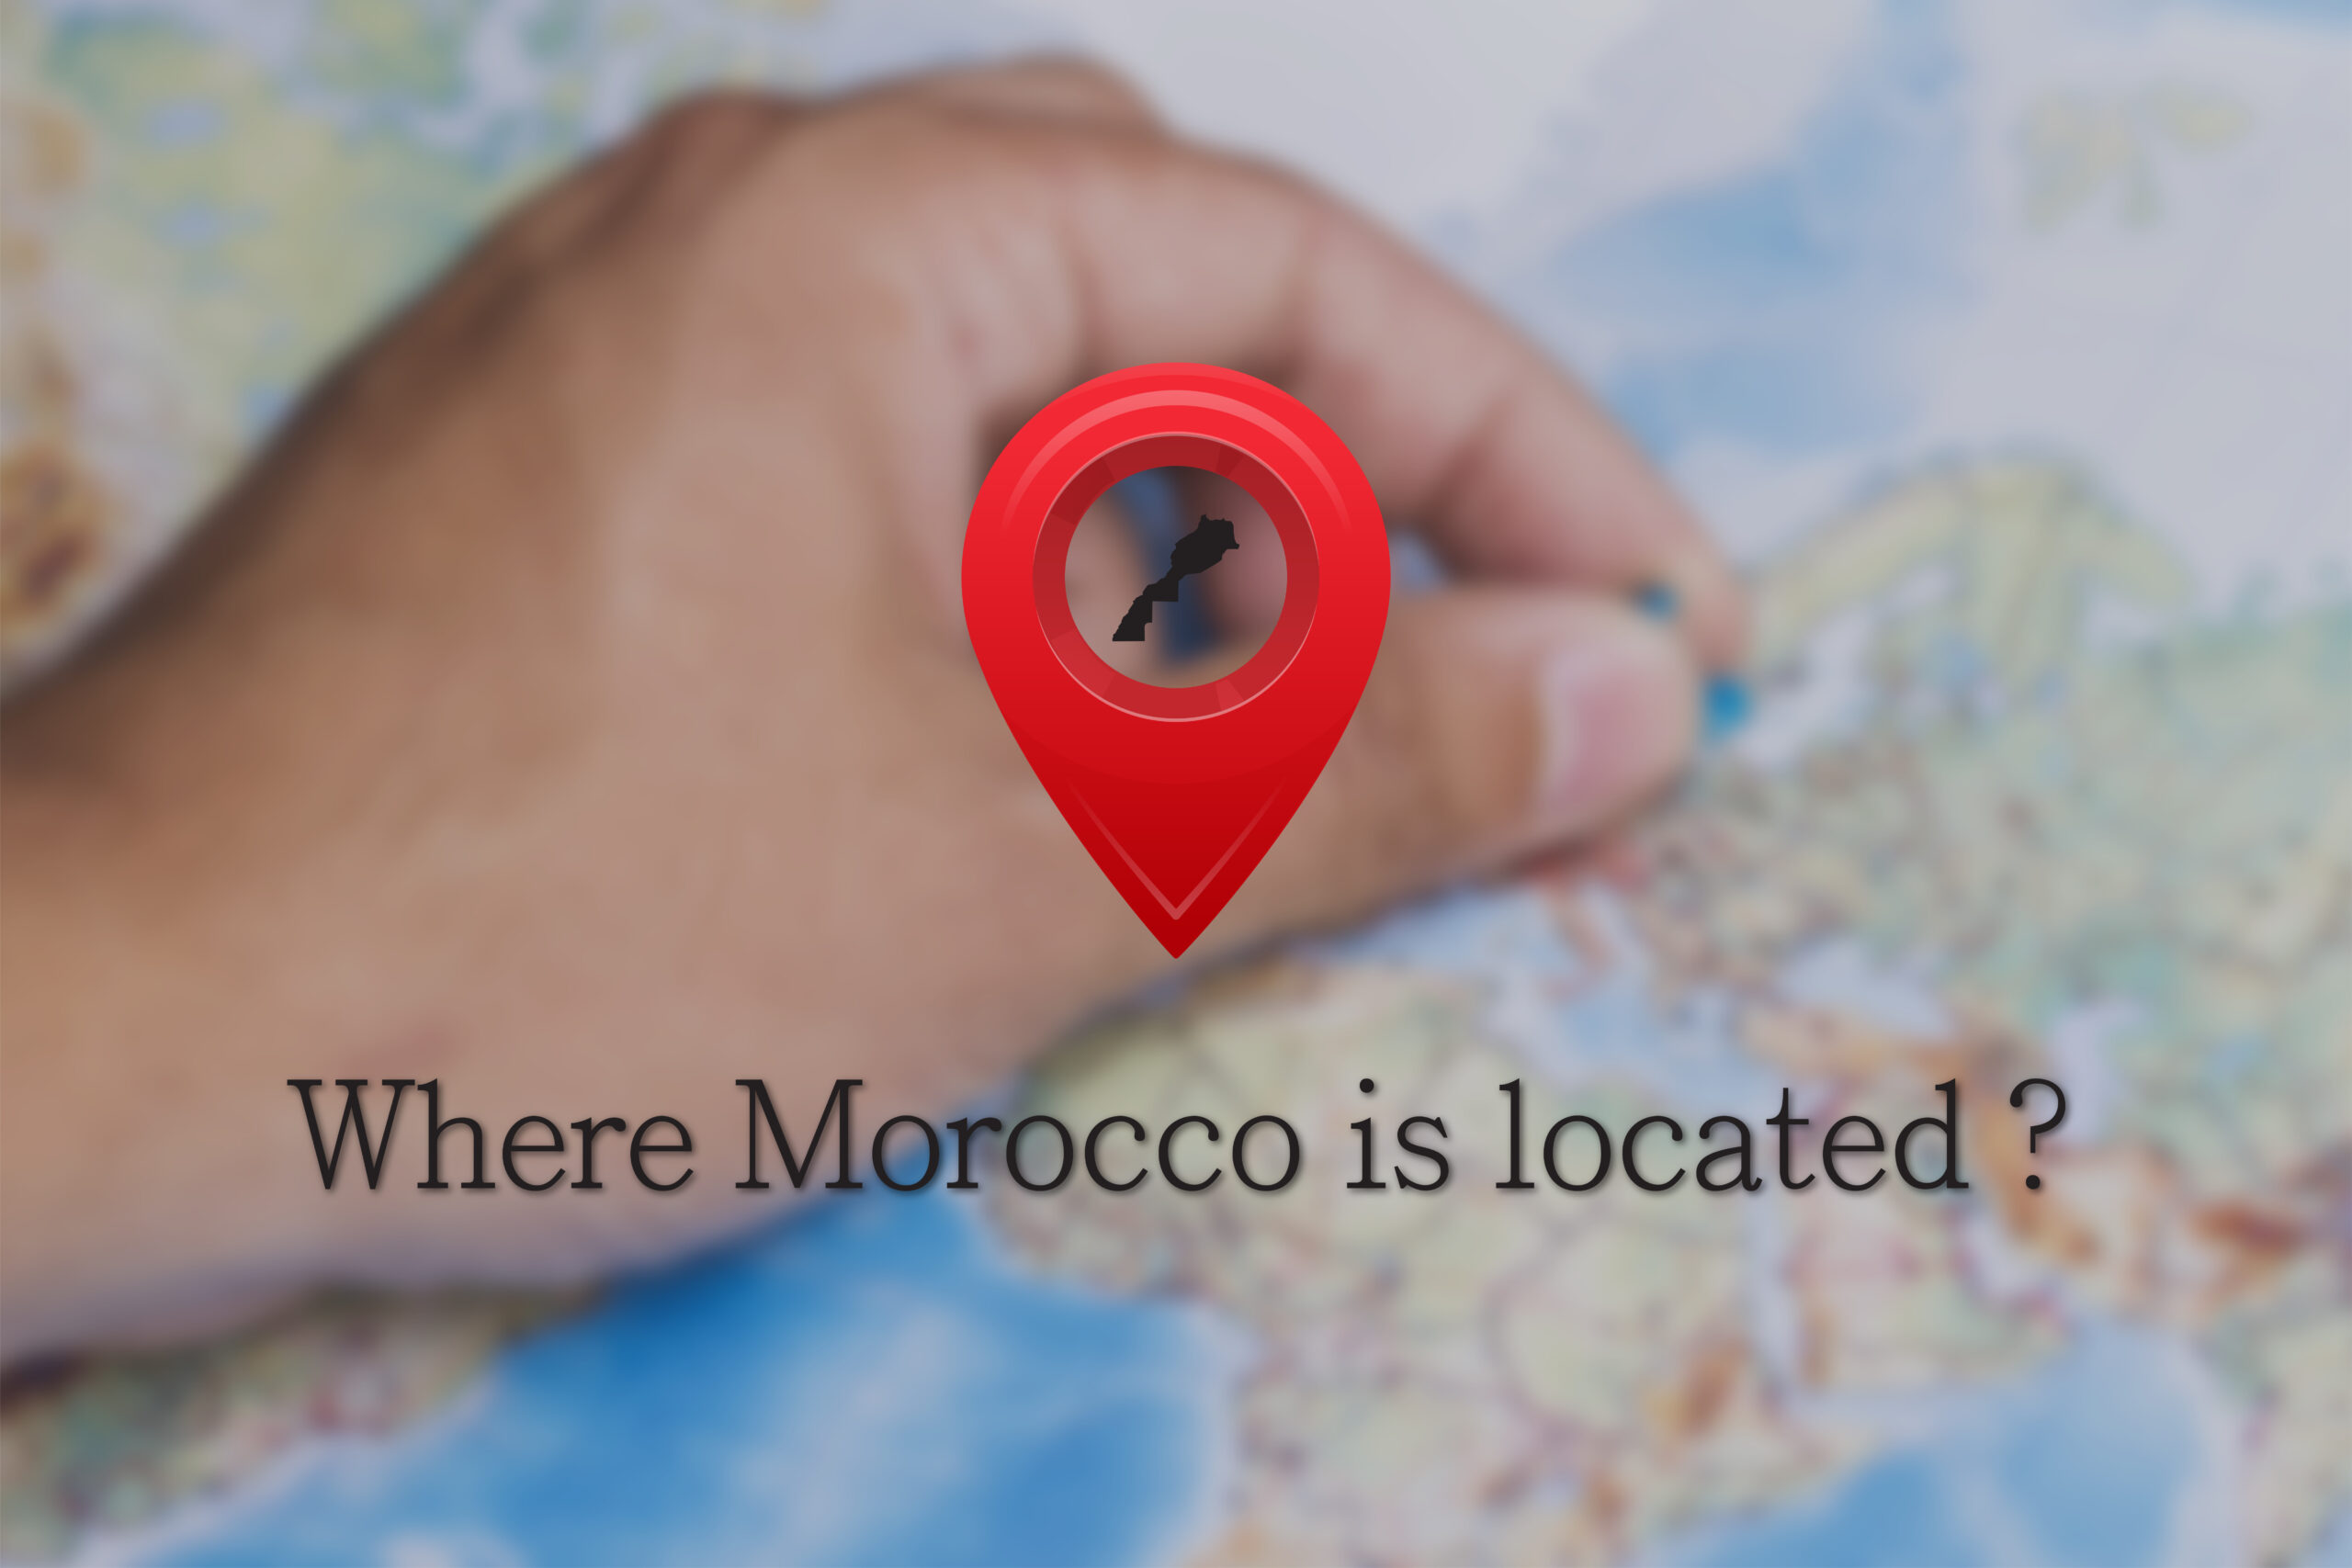 Where Morocco is located